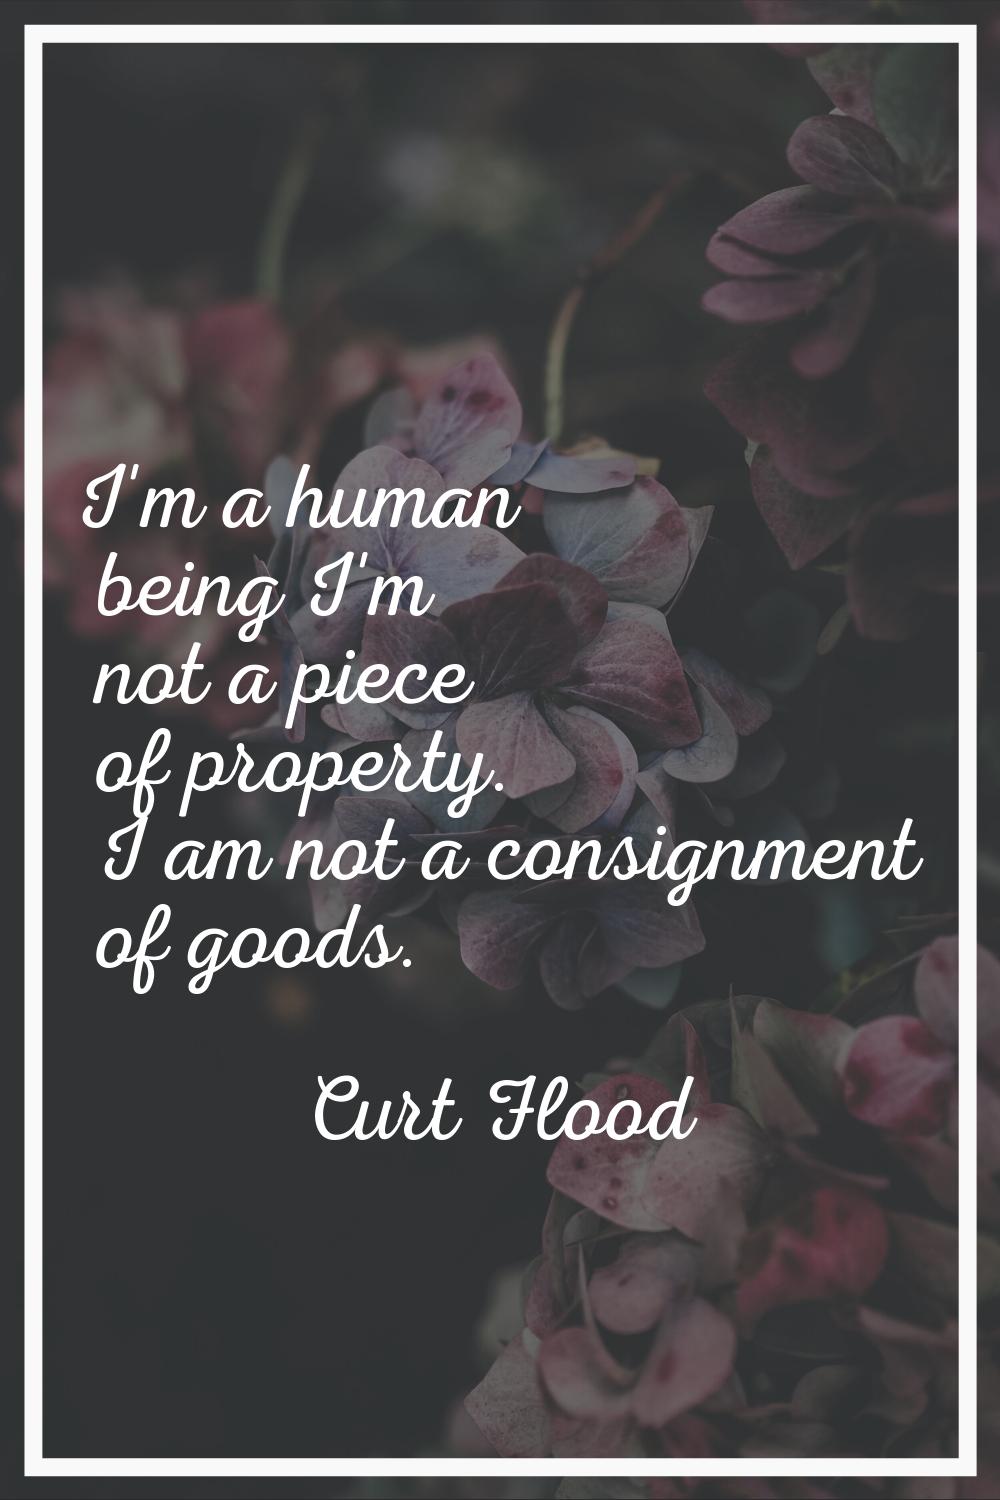 I'm a human being I'm not a piece of property. I am not a consignment of goods.